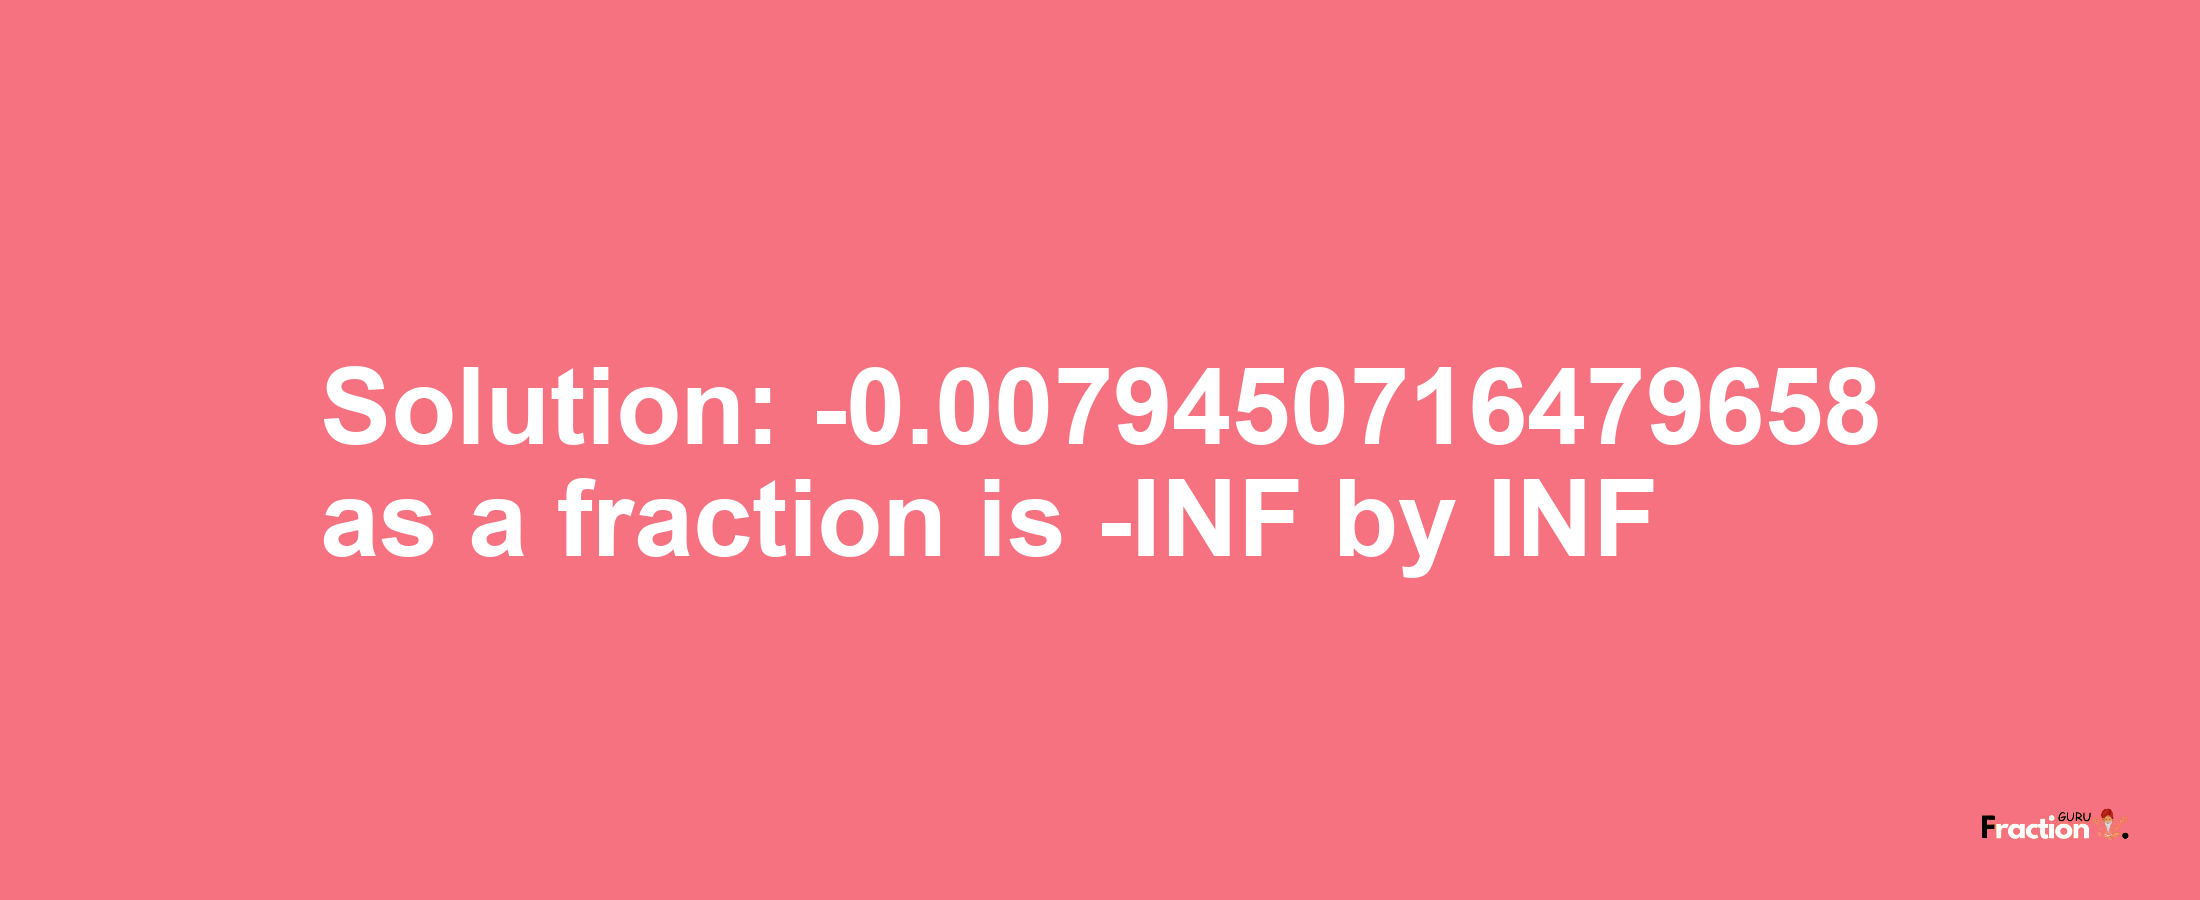 Solution:-0.0079450716479658 as a fraction is -INF/INF